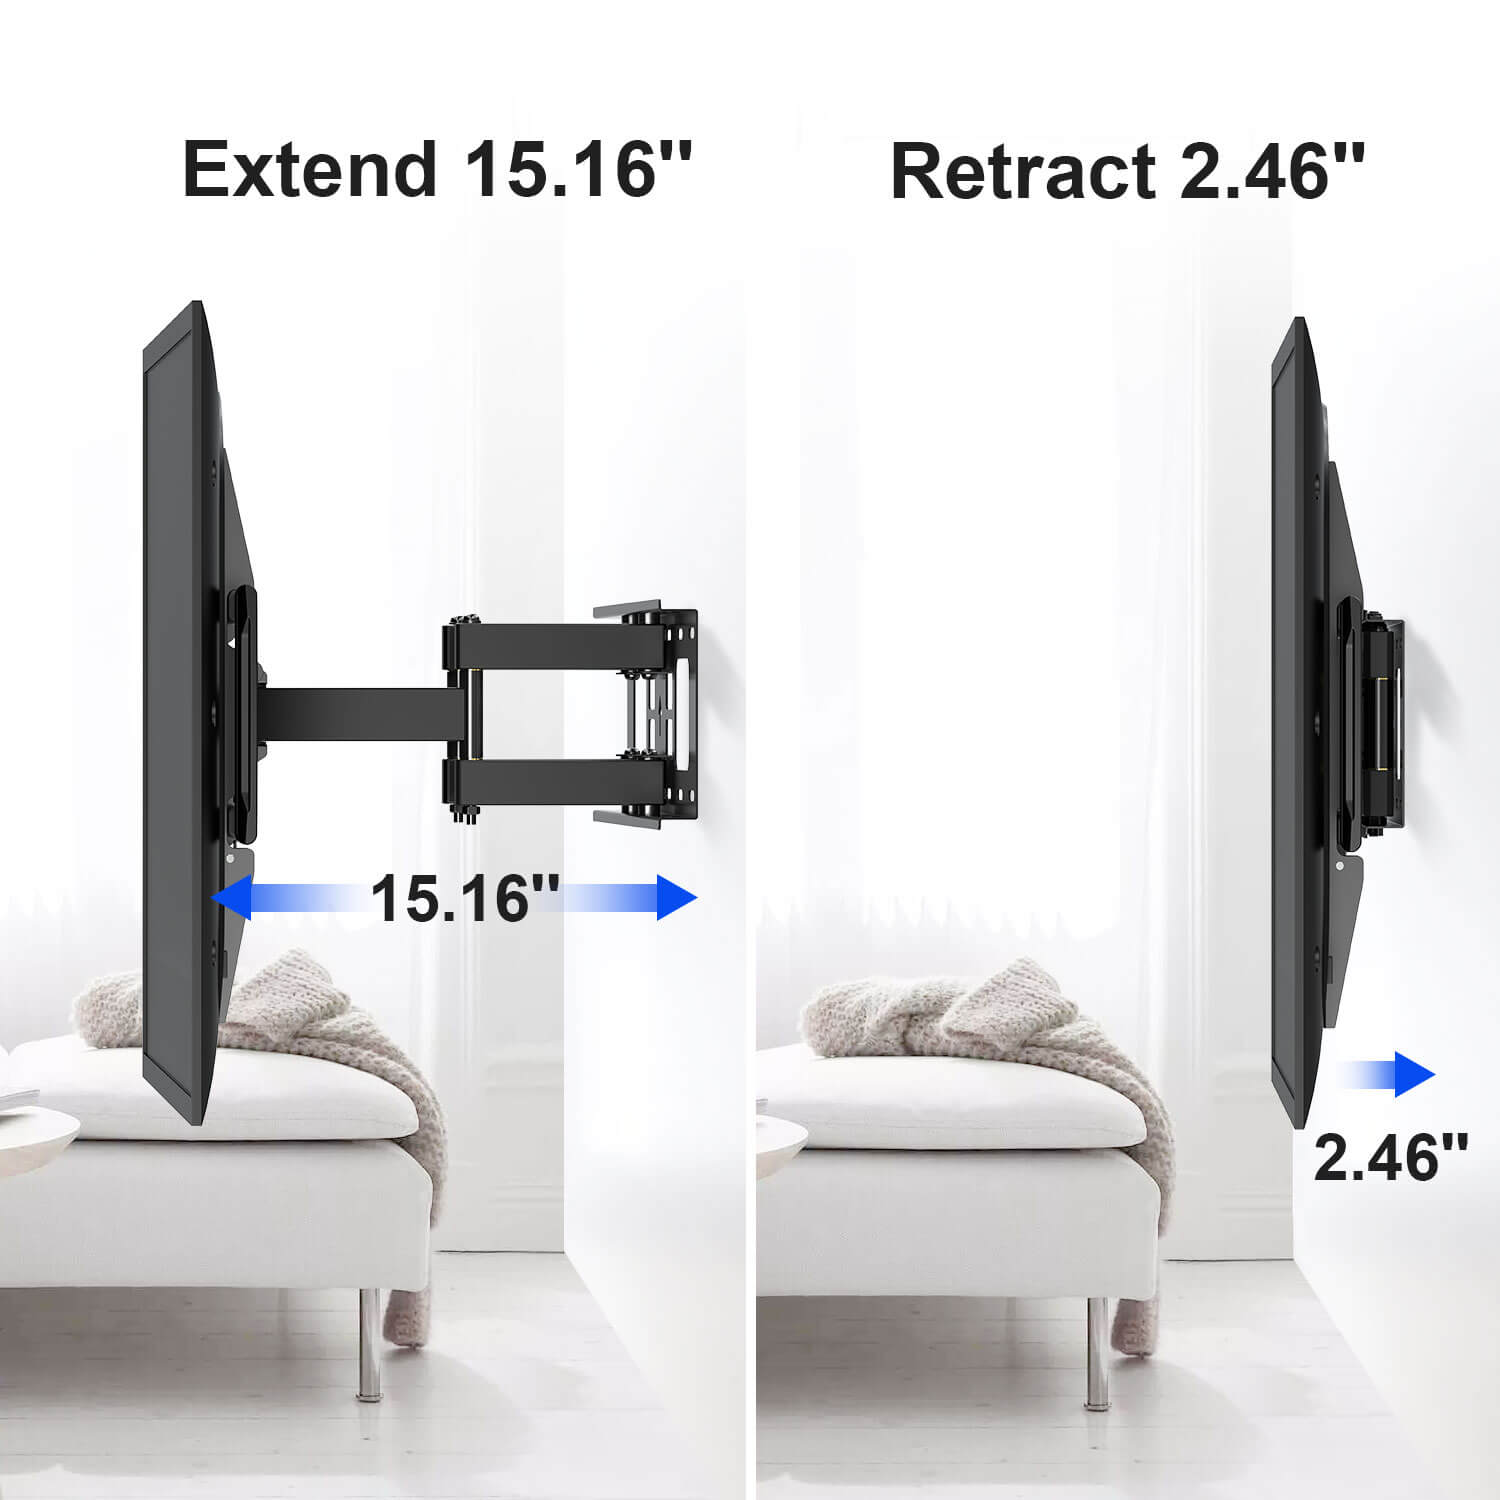 extendable TV mount with 15.16'' extension and 2.46'' low profile